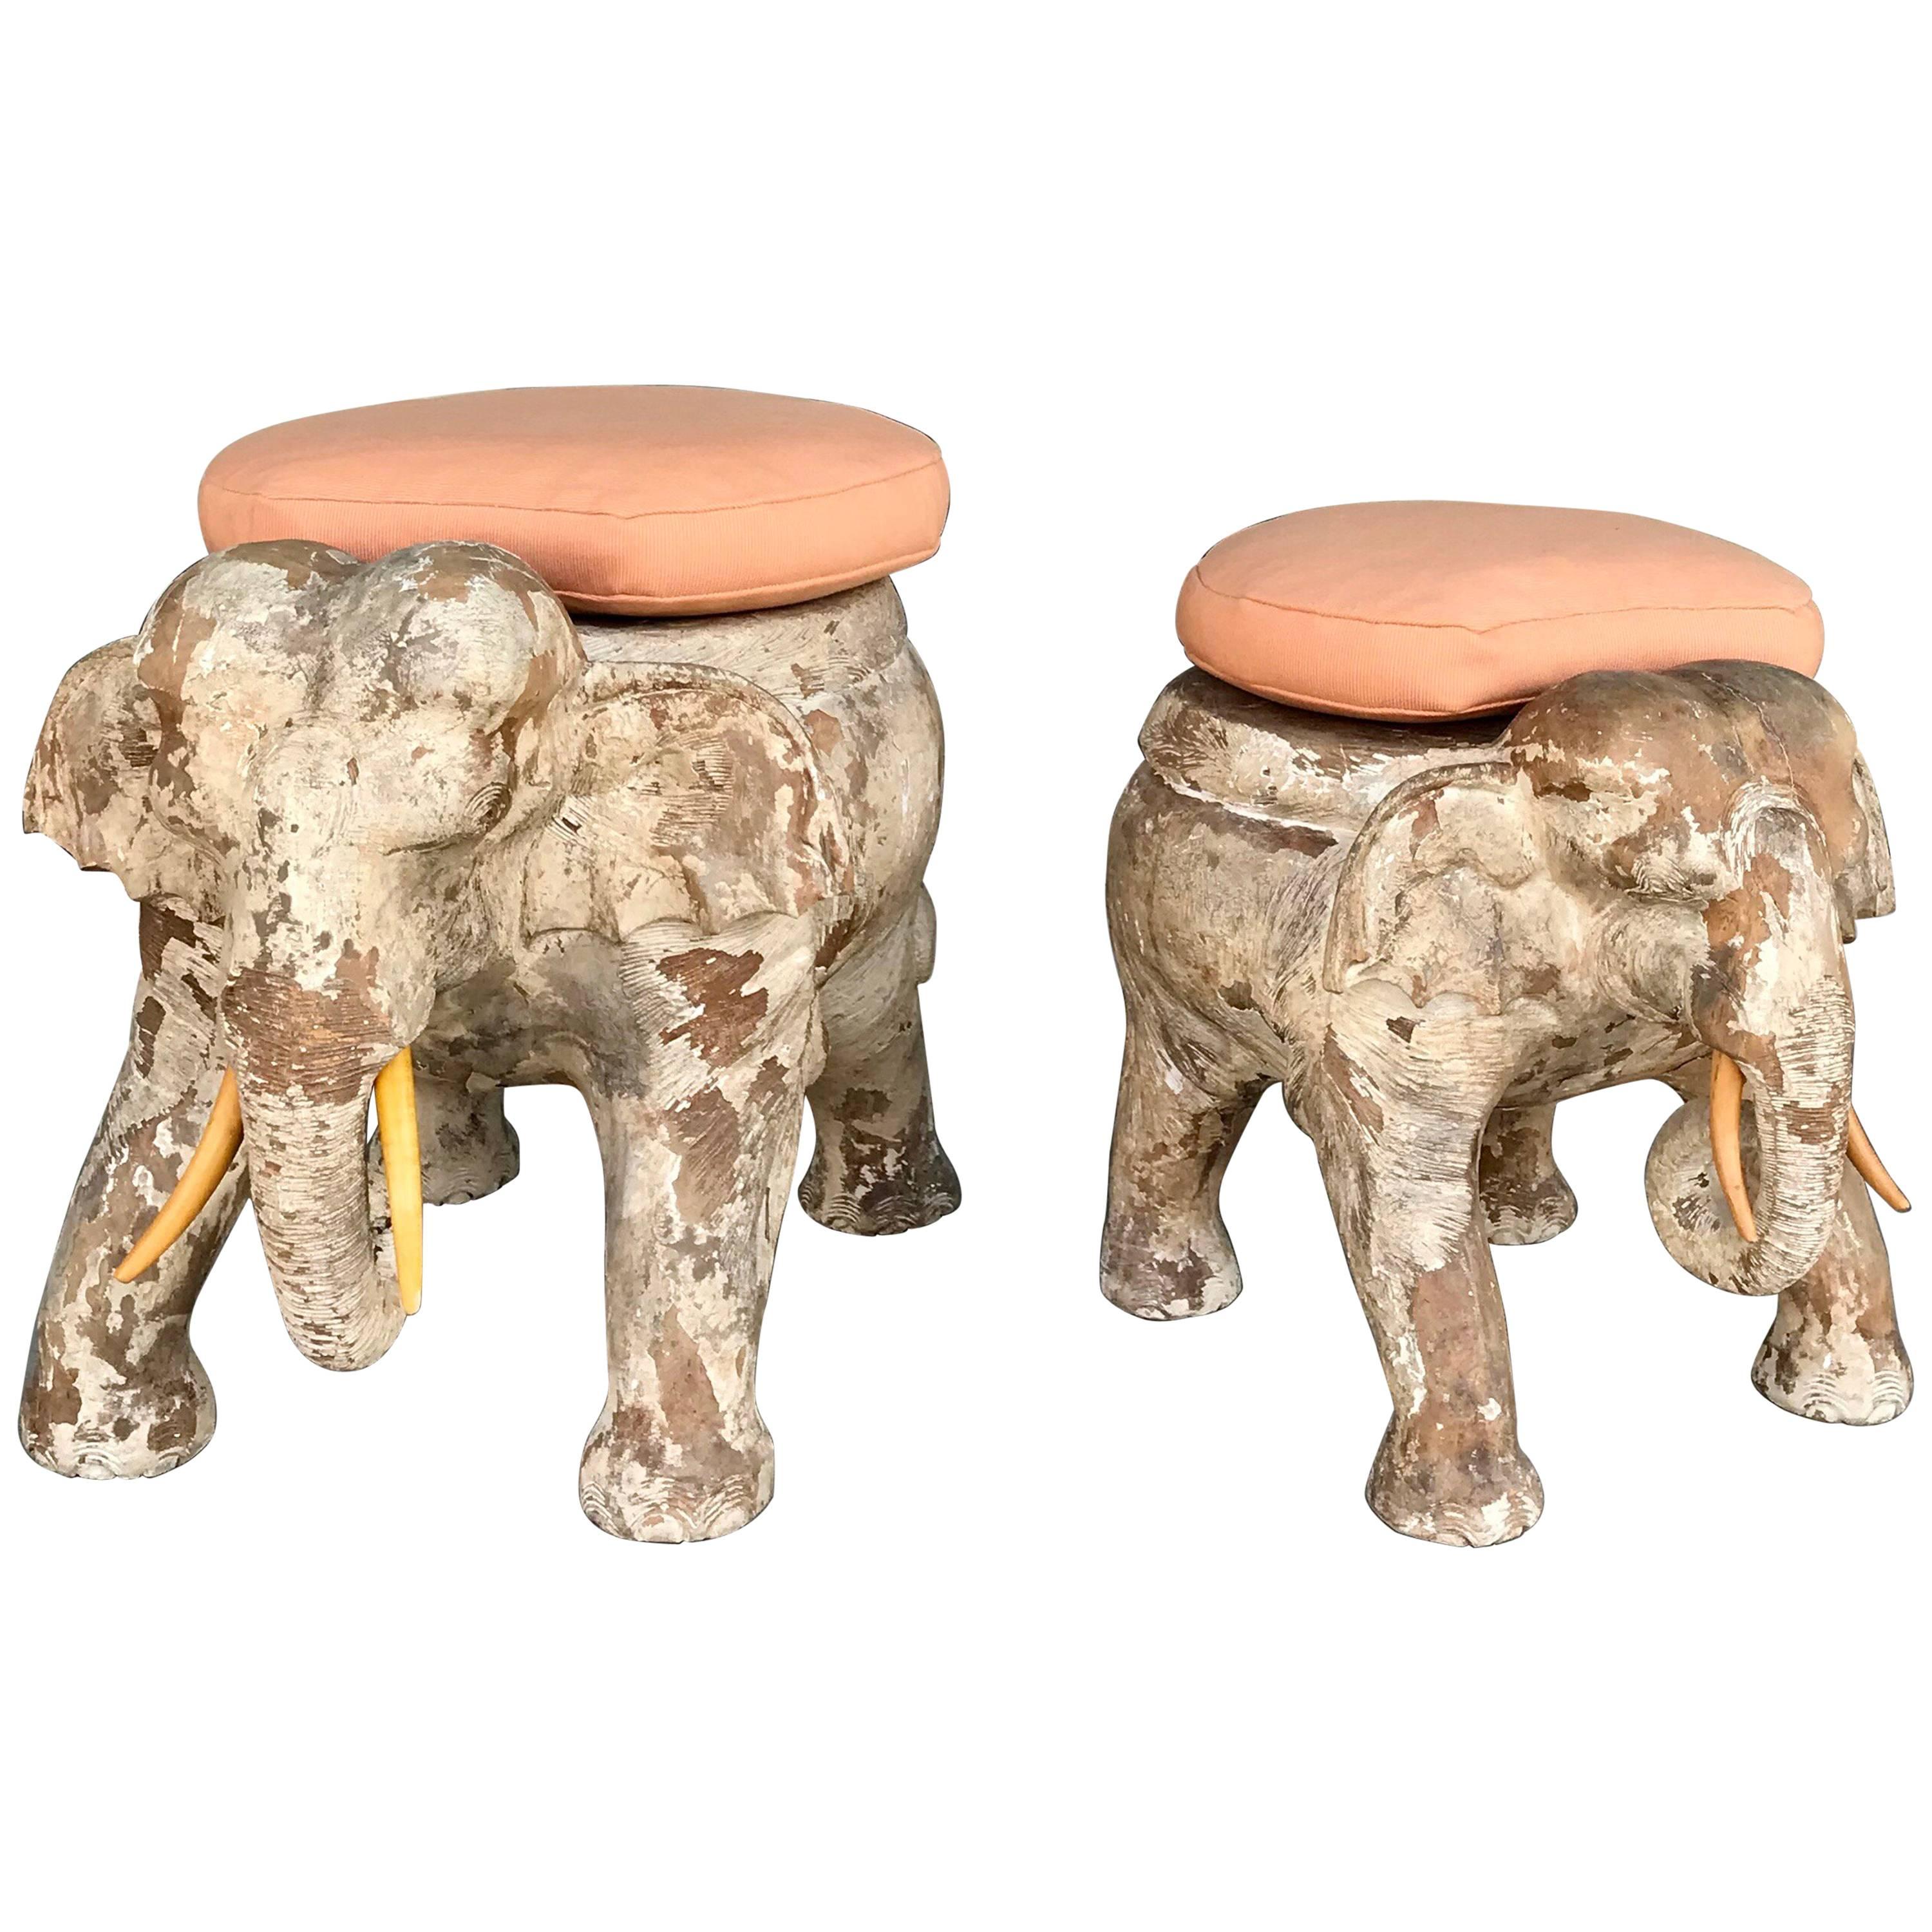 Pair of Antiqued Solid Wood Elephant Stools from the Sinatra Estate 